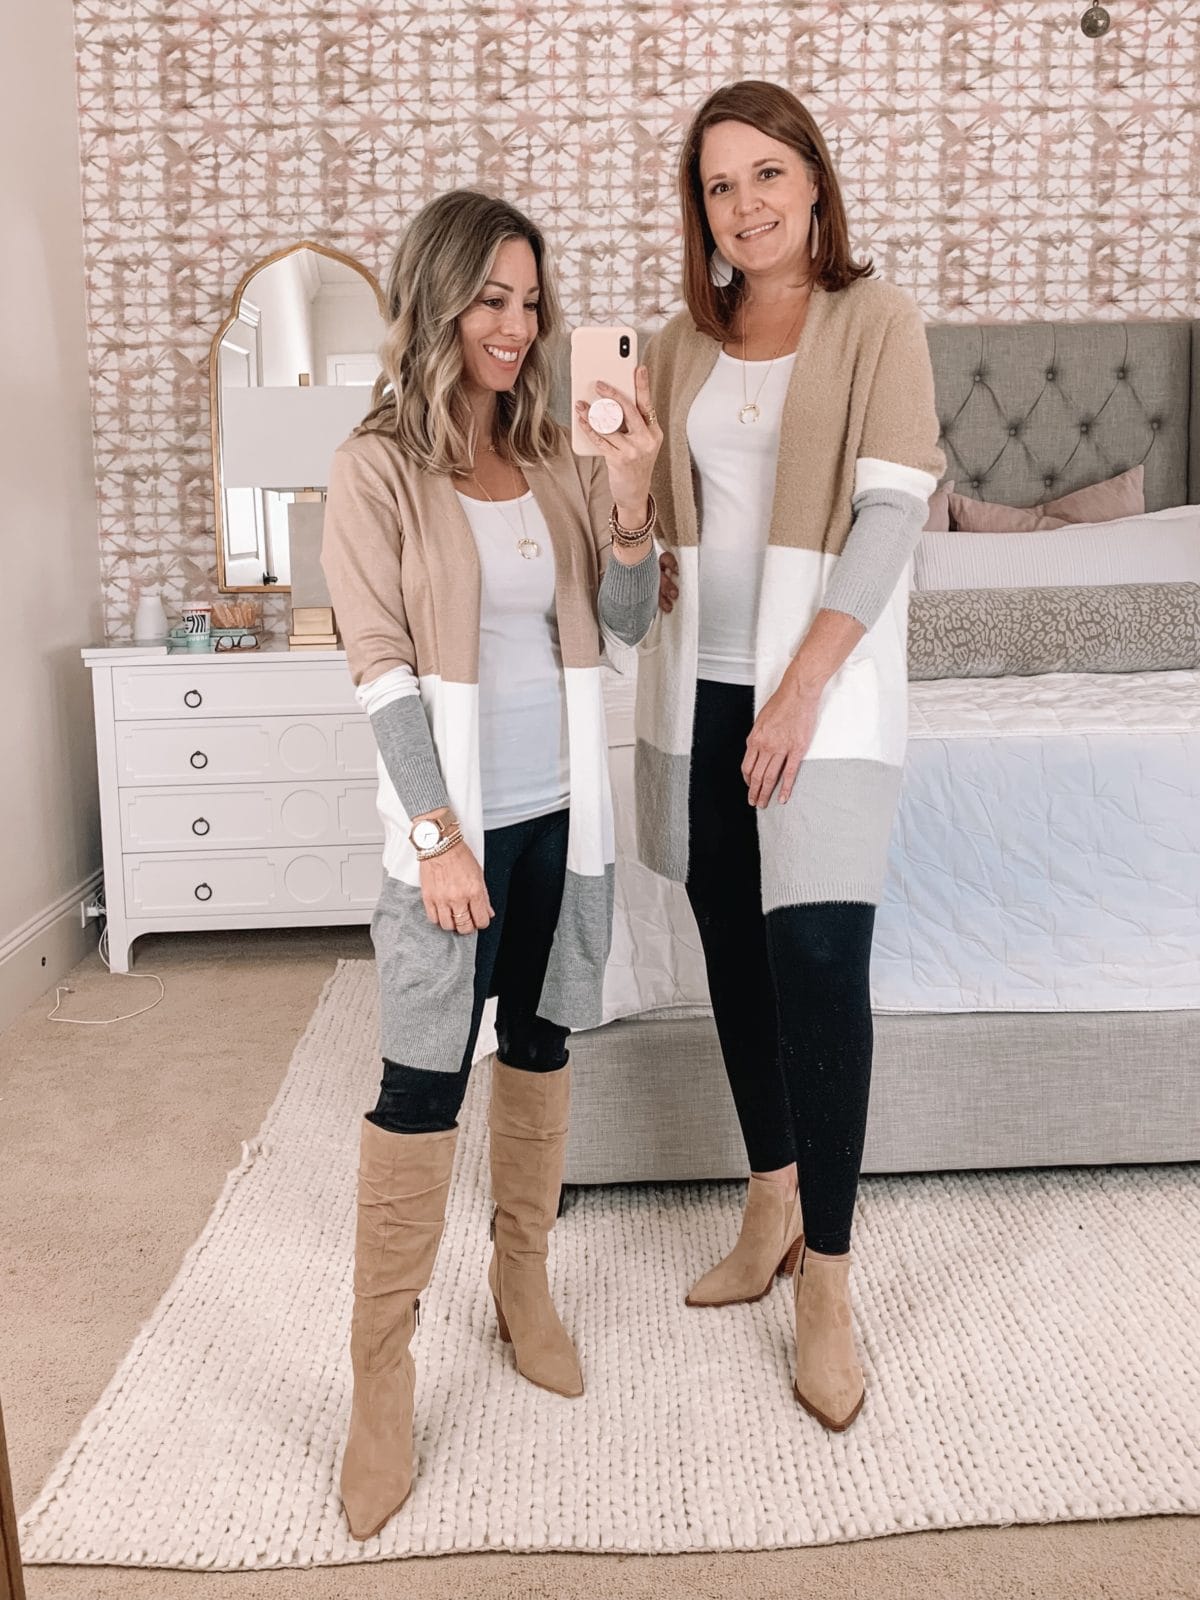 Amazon Fashion Faves, Colorblock Cardigan, leggings, Knee High Boots, Booties